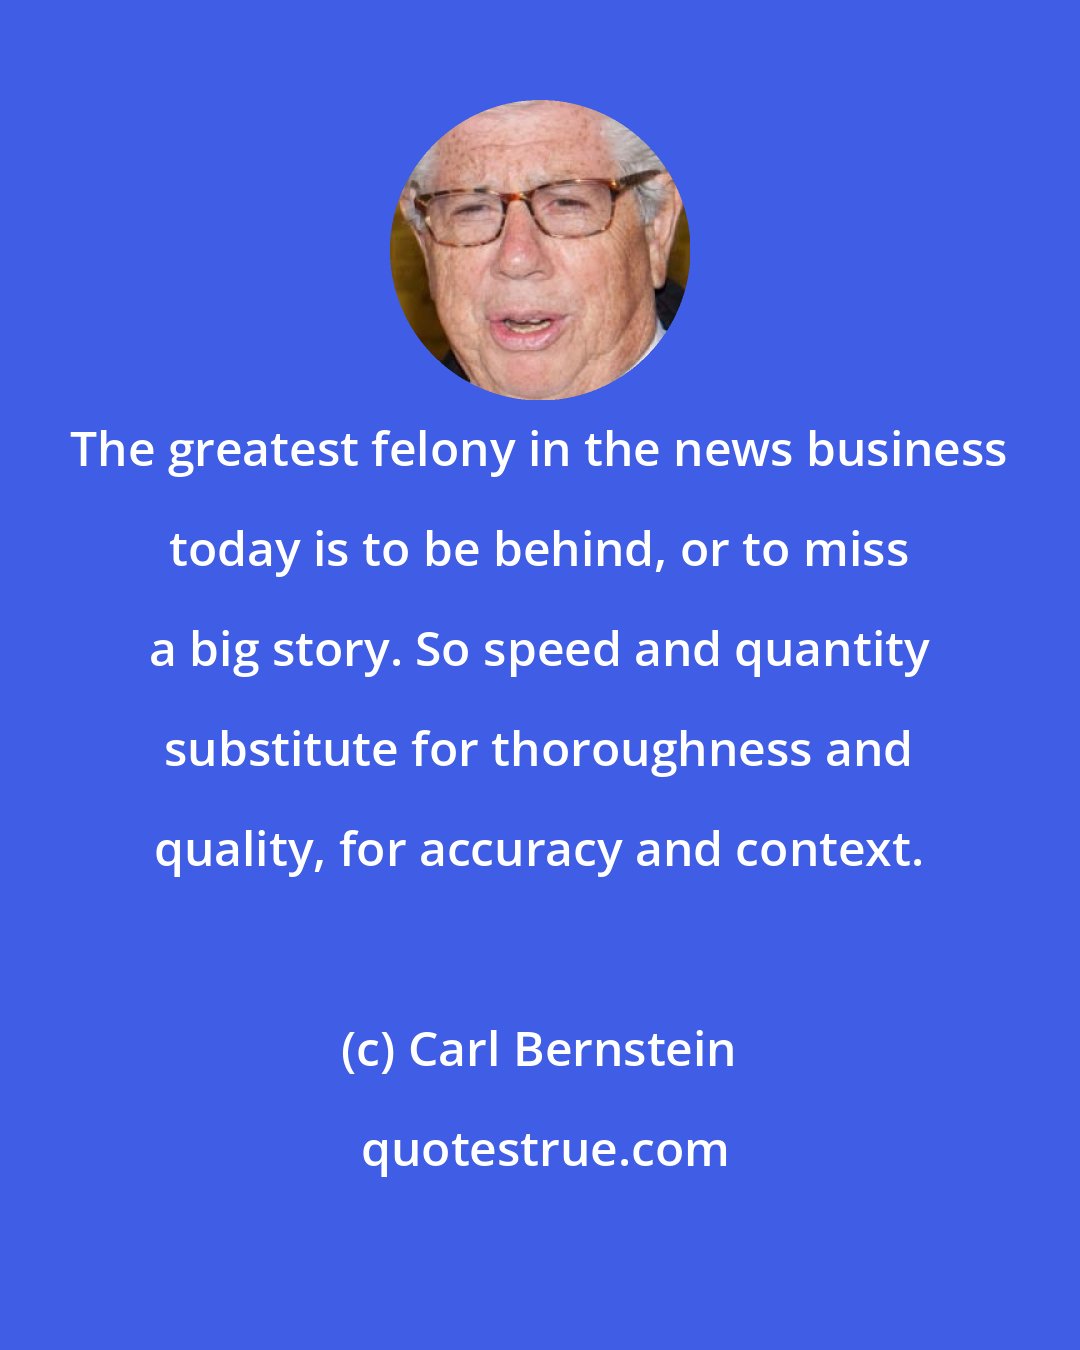 Carl Bernstein: The greatest felony in the news business today is to be behind, or to miss a big story. So speed and quantity substitute for thoroughness and quality, for accuracy and context.